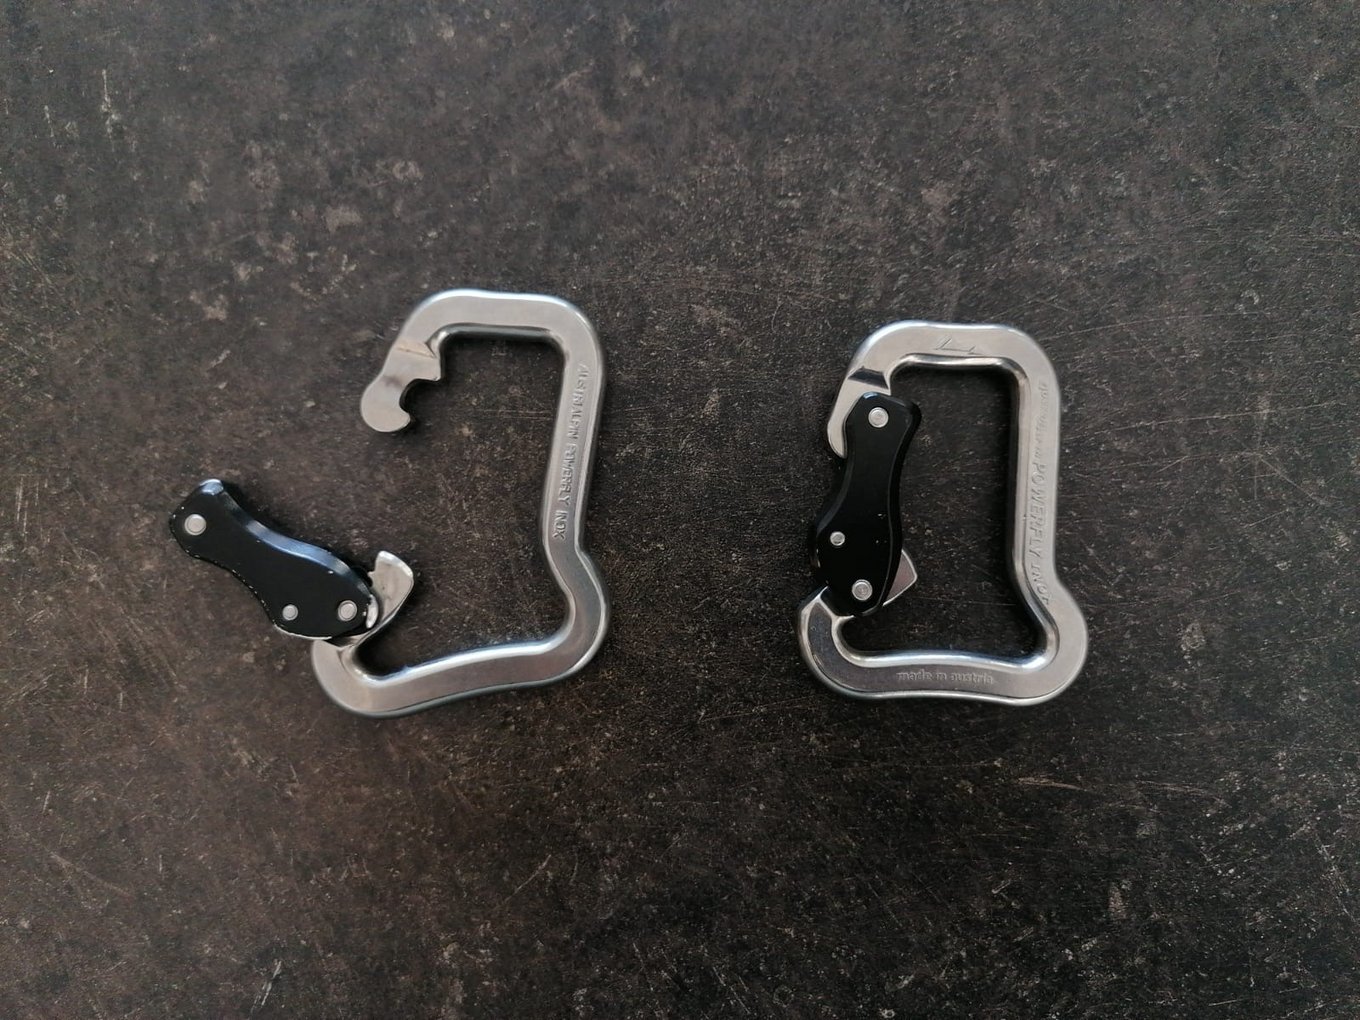 Due to their high fracture strian, stainless steel carabiners like our POWERFLY or STRATUS INOX extend visibly before they break. In this picture: The POWERFLY before and after testing.